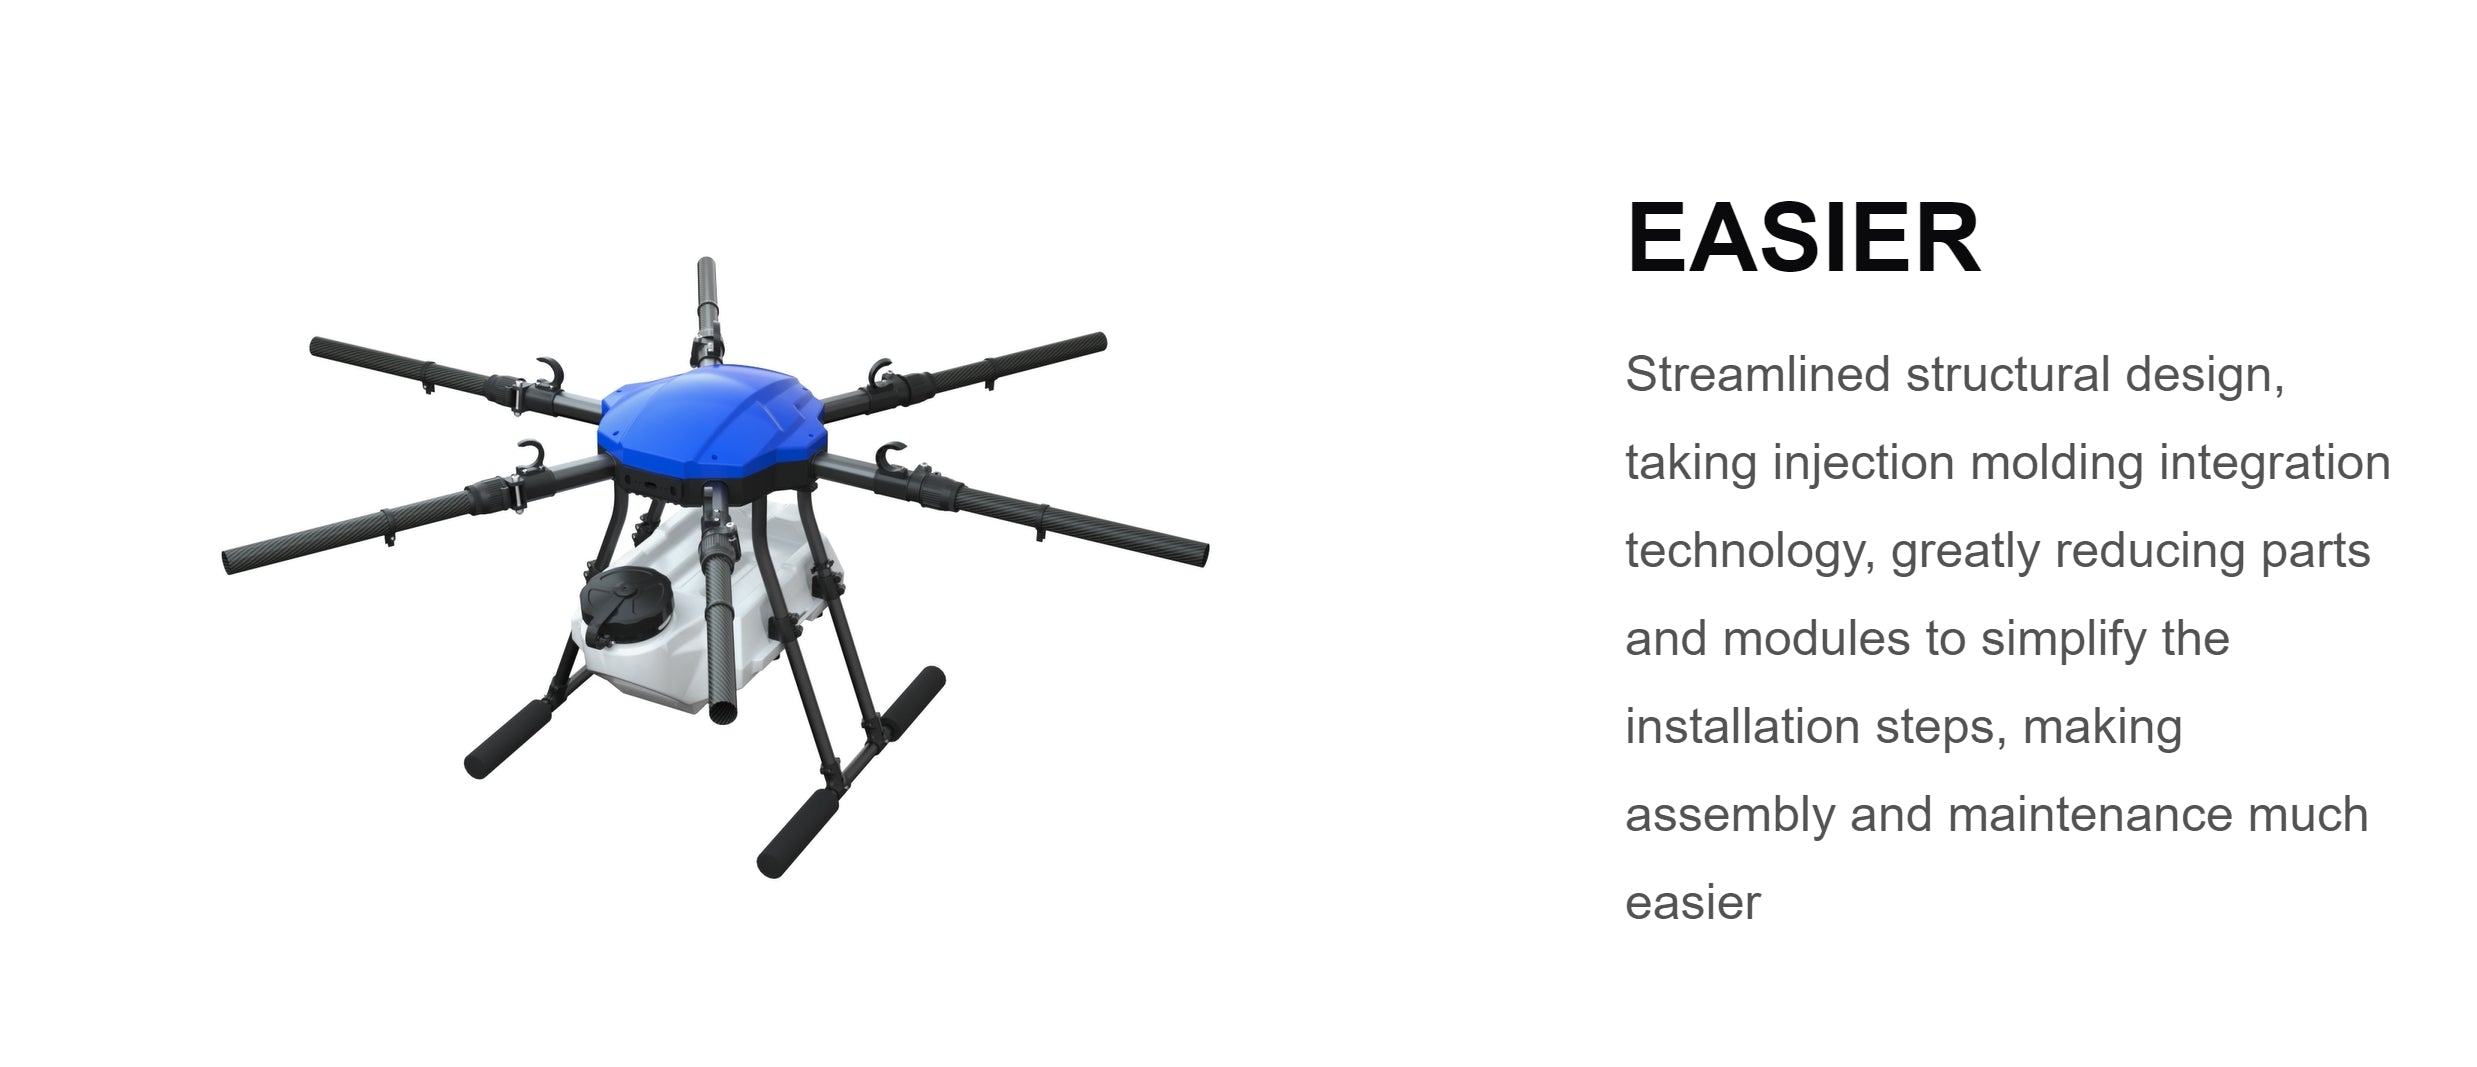 EFT E610M 10L Agriculture Drone, Streamlined design for easy installation and maintenance with simplified parts.